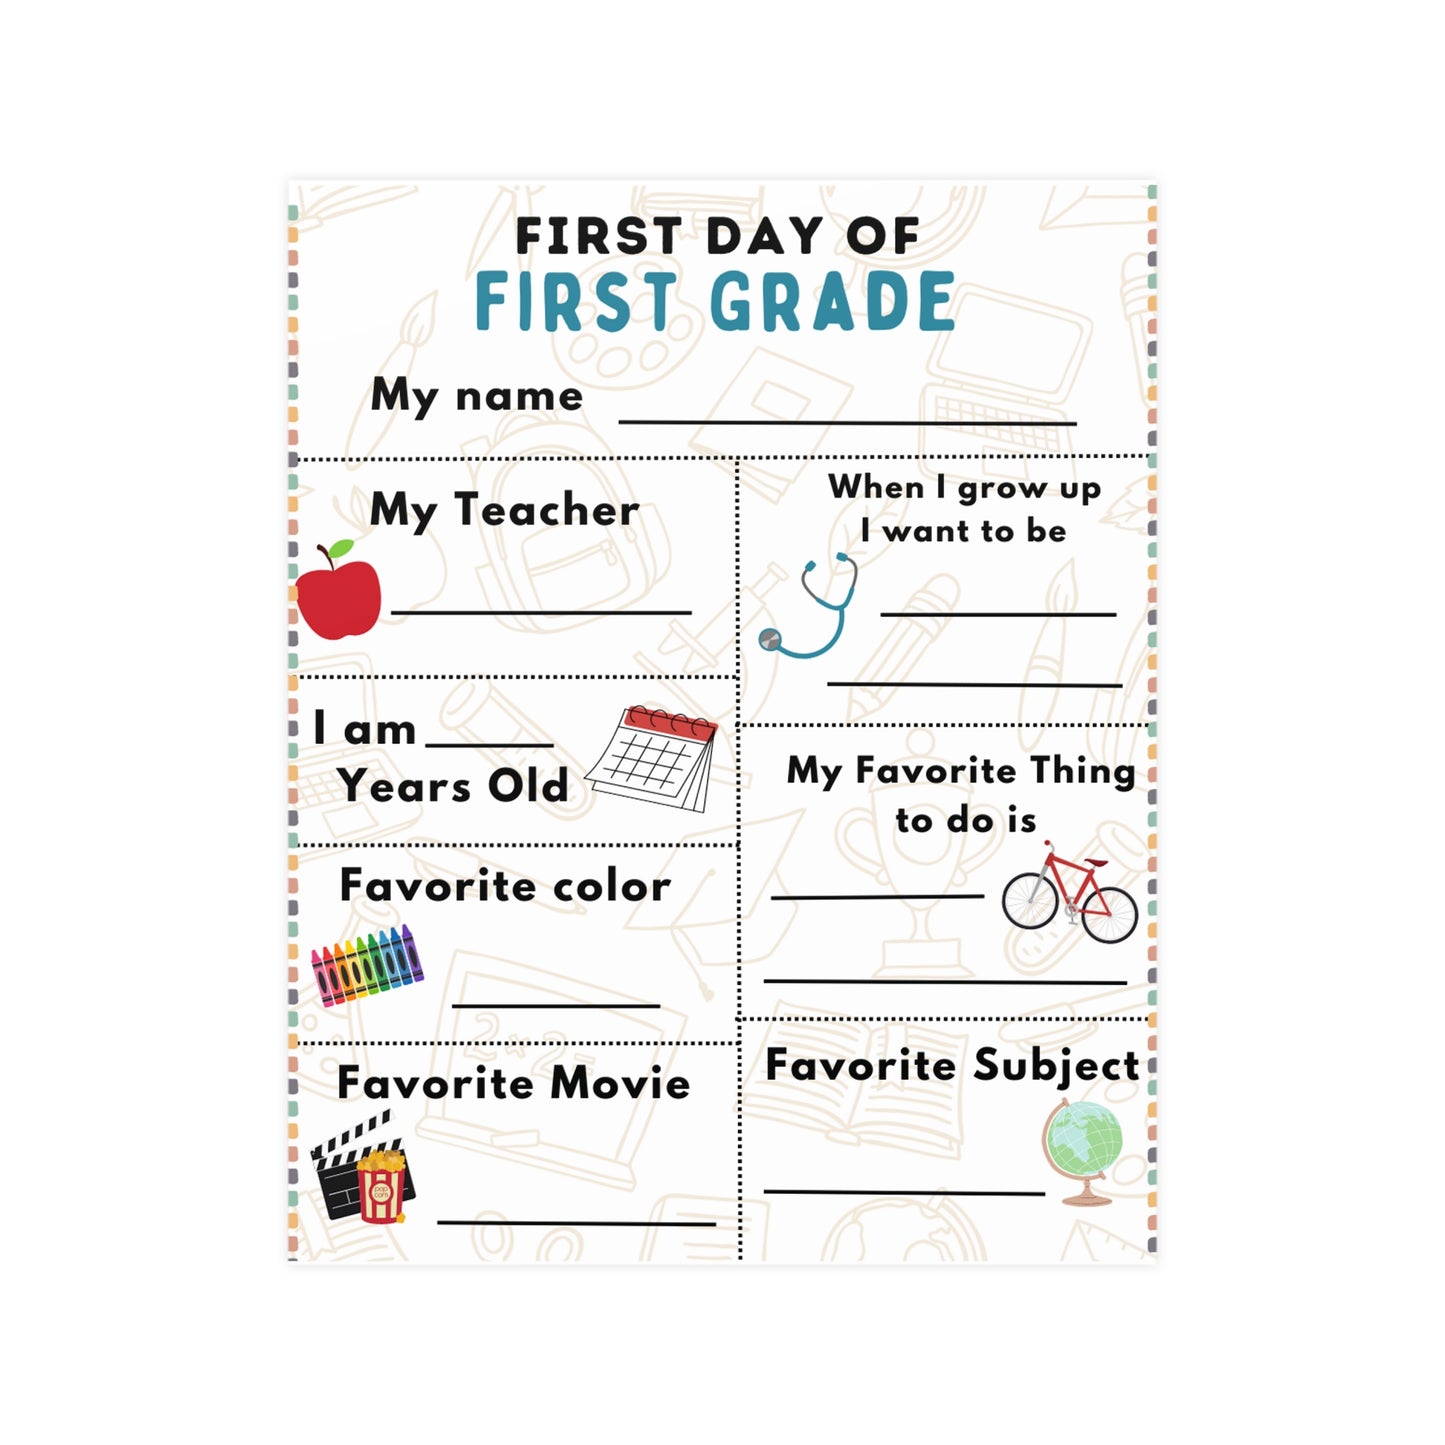 ‘First Day of First Grade’ Poster